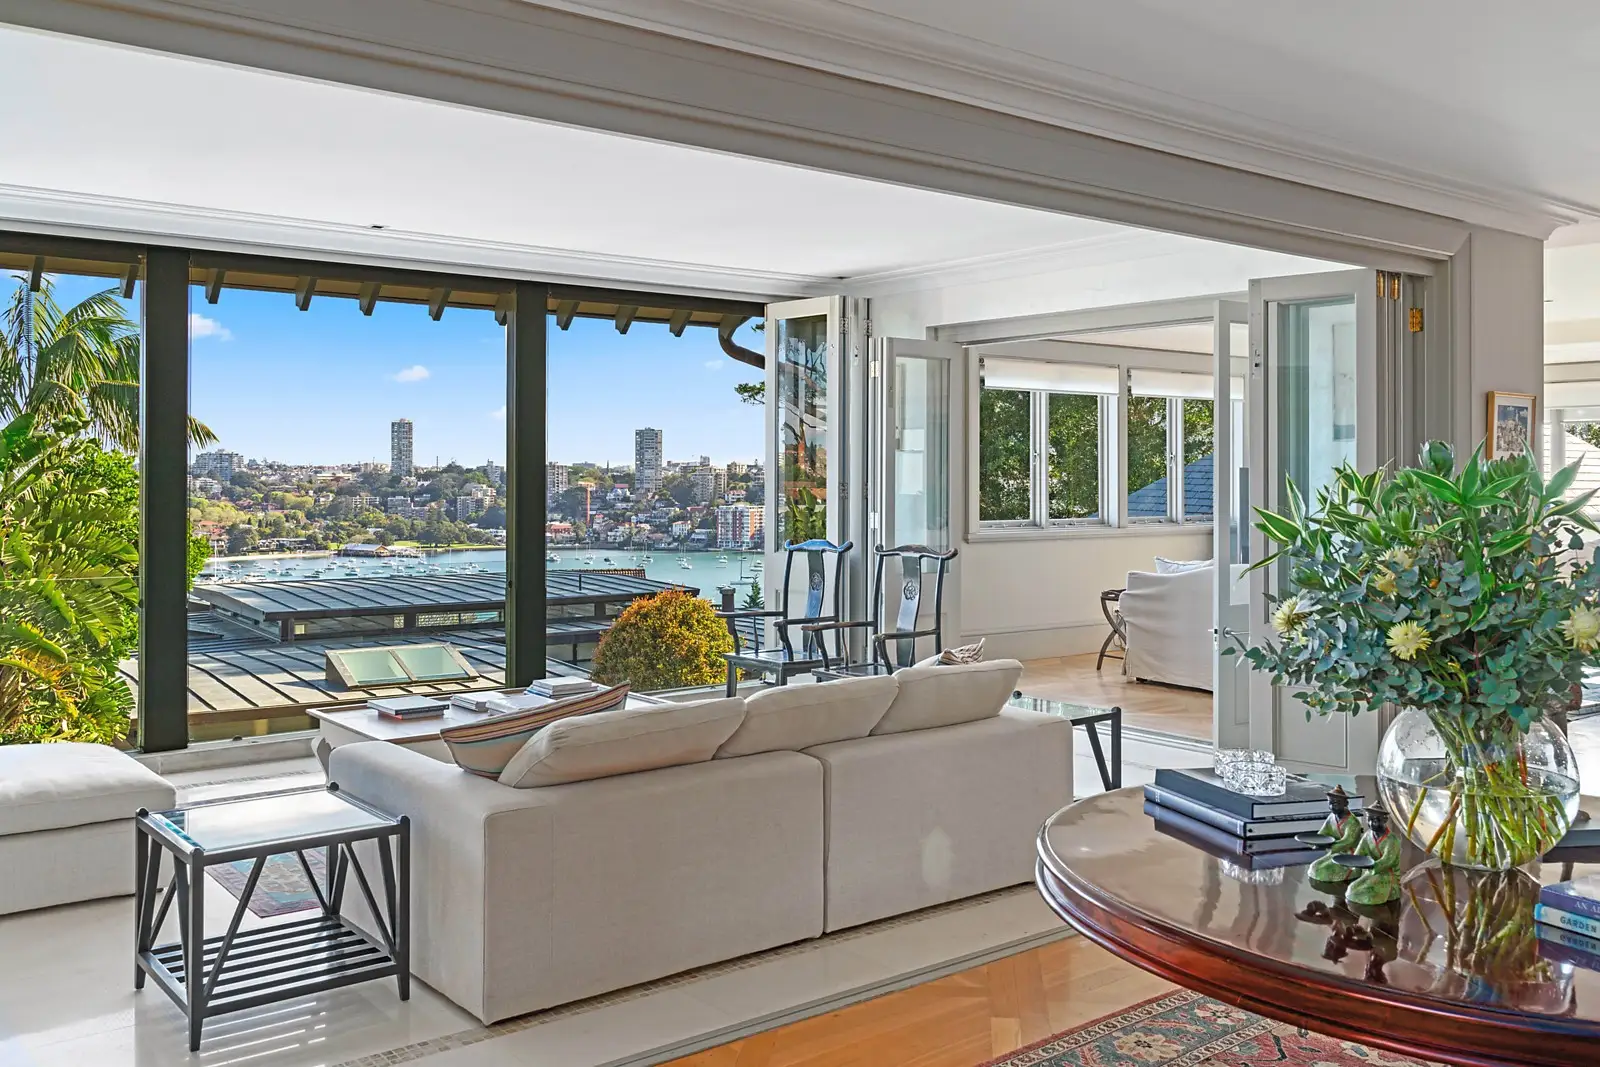 Photo #2: 3/6 Wentworth Street, Point Piper - Sold by Sydney Sotheby's International Realty